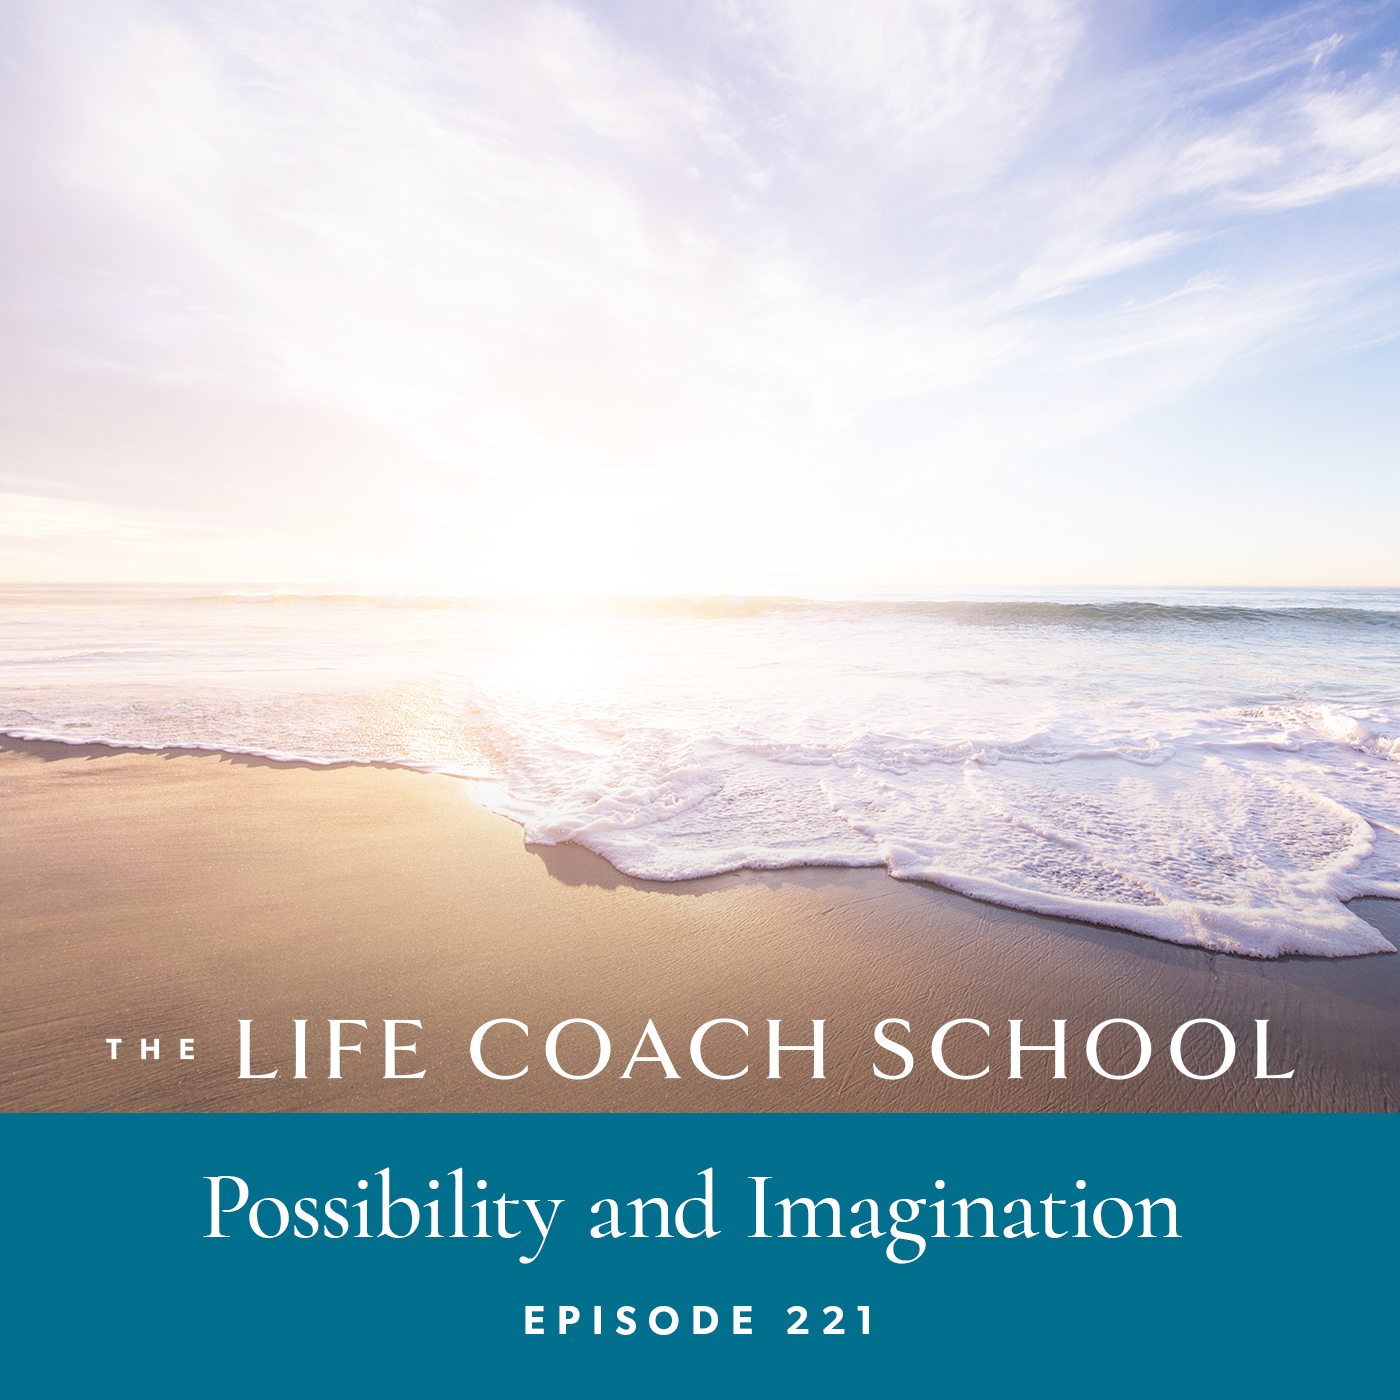 The Life Coach School Podcast with Brooke Castillo | Episode 221 | Possibility and Imagination